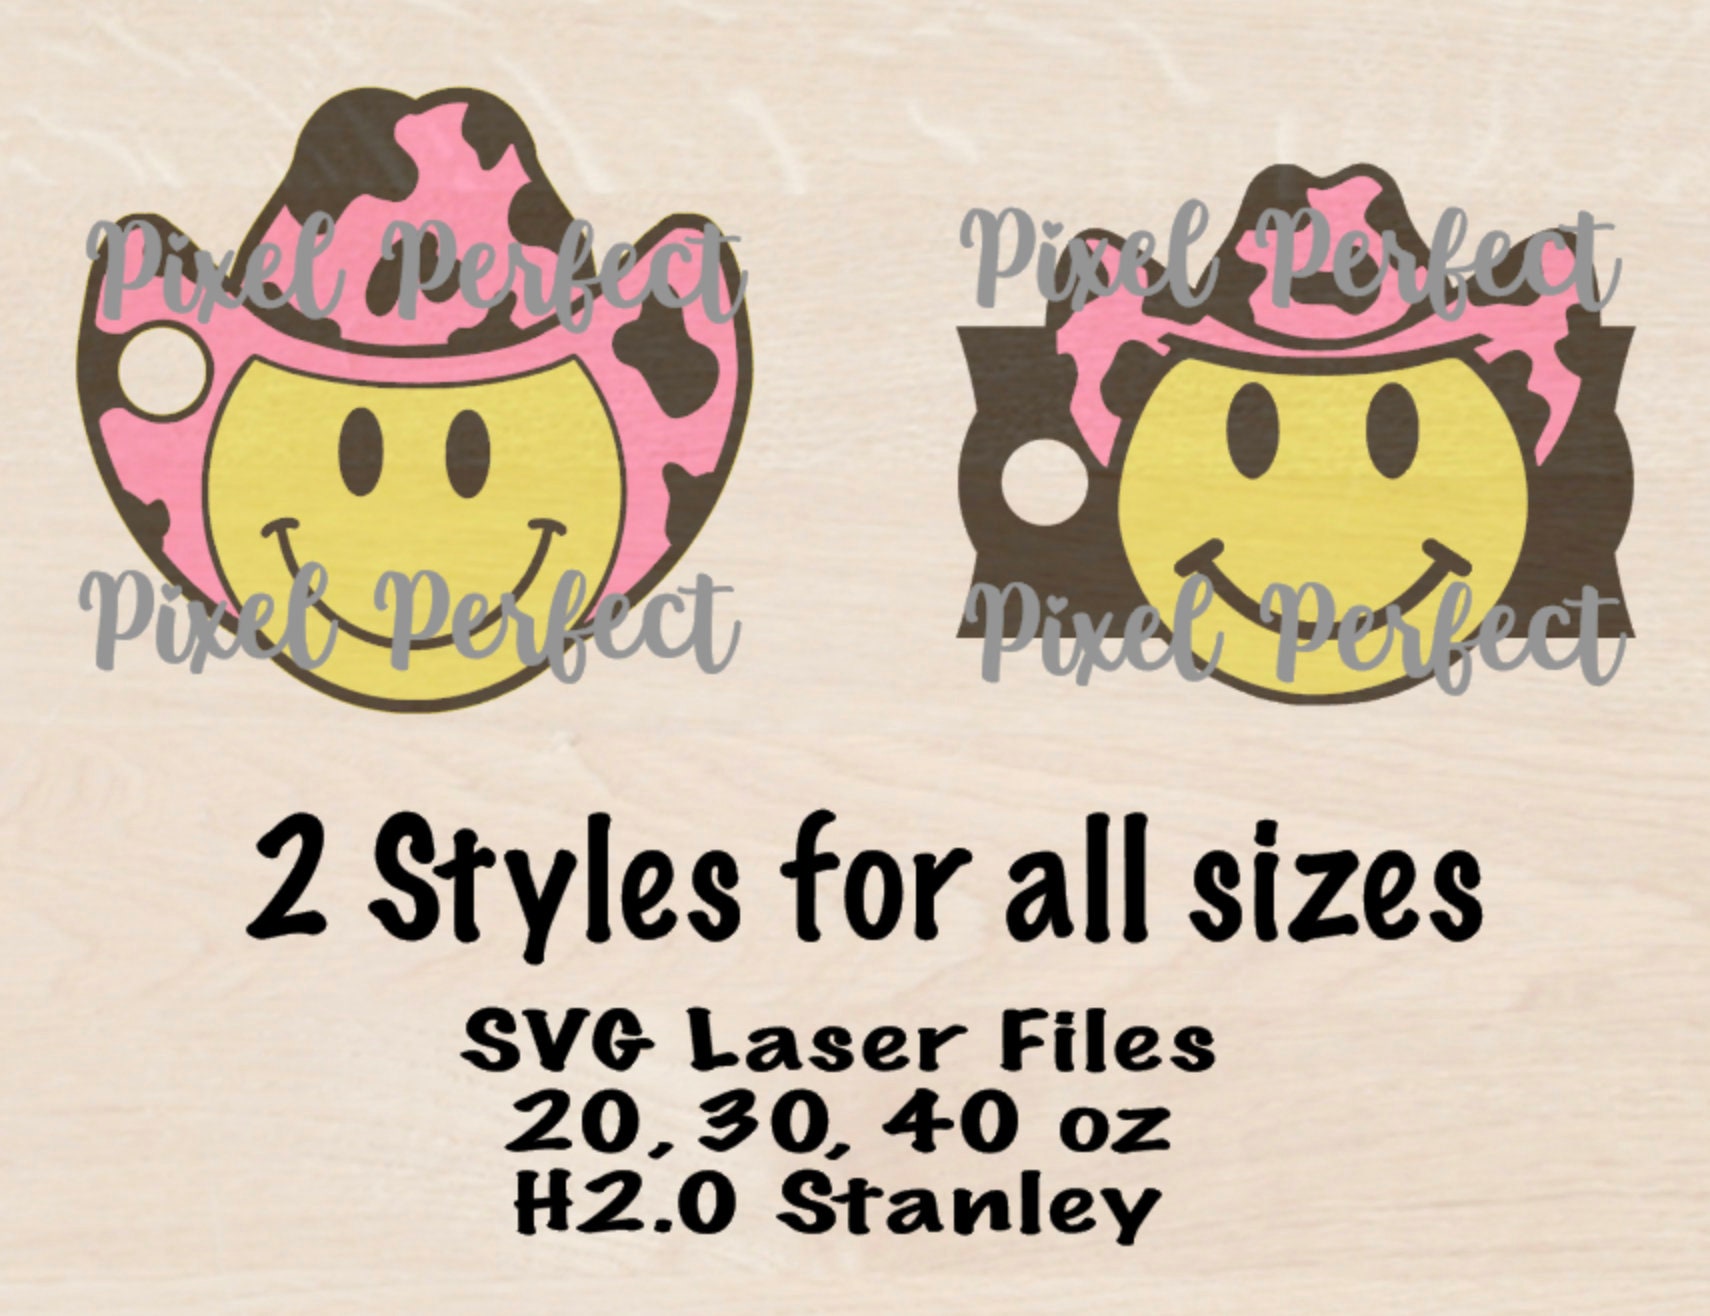 Tumbler Tag Laser Files Smiley Cowboy, Cup Topper Smiley Face SVG Download,  H2.0 Tumbler Files Happy Face for Laser Cutting, Download Only